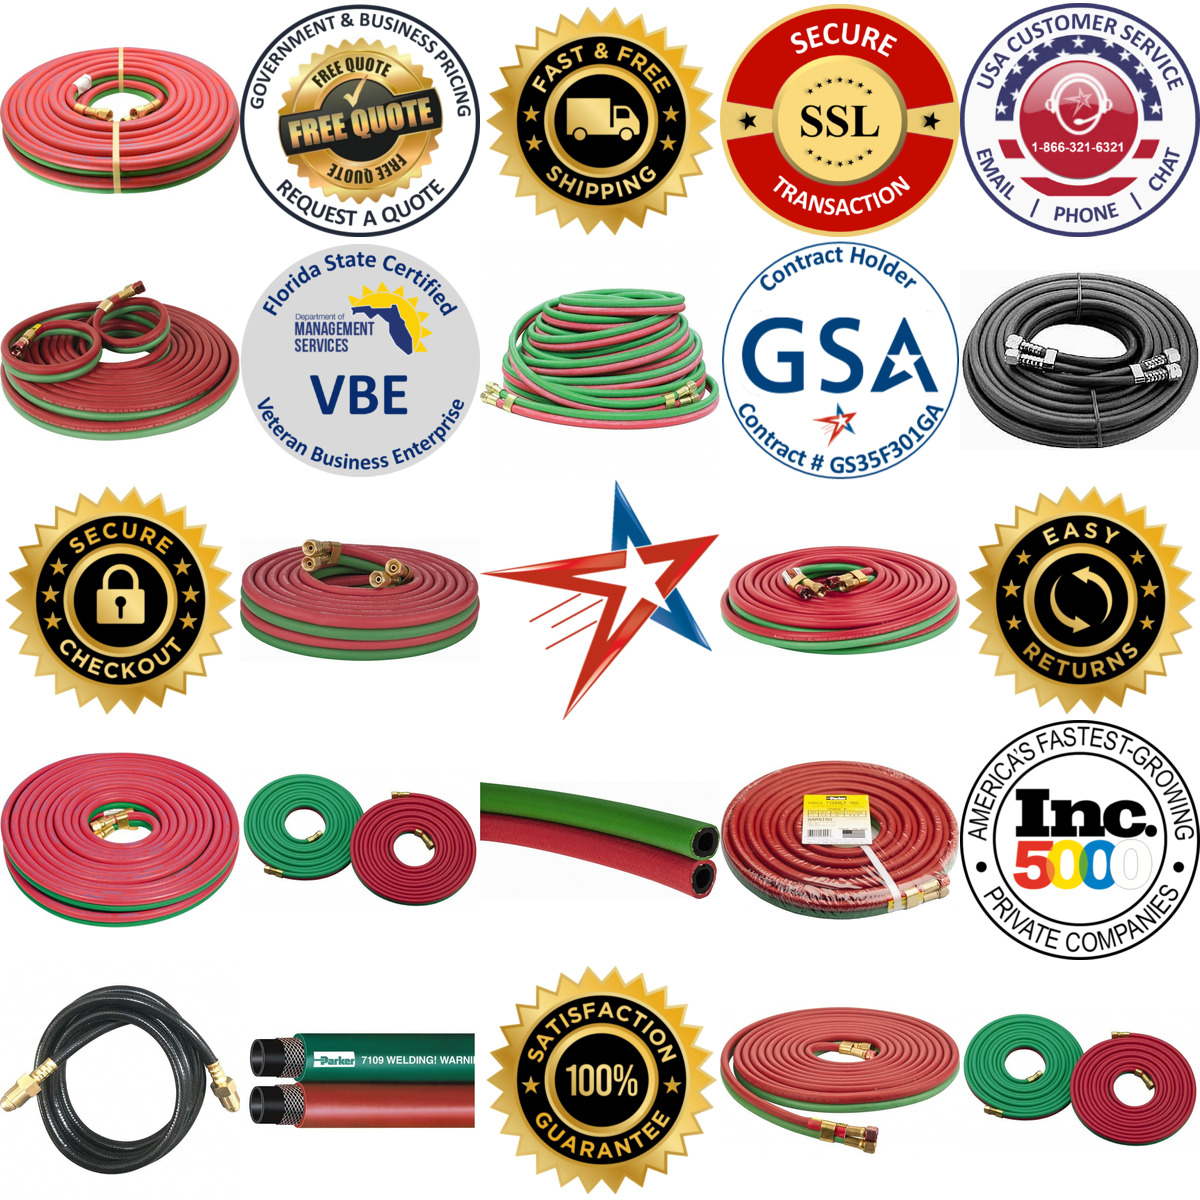 A selection of Welding Hose products on GoVets